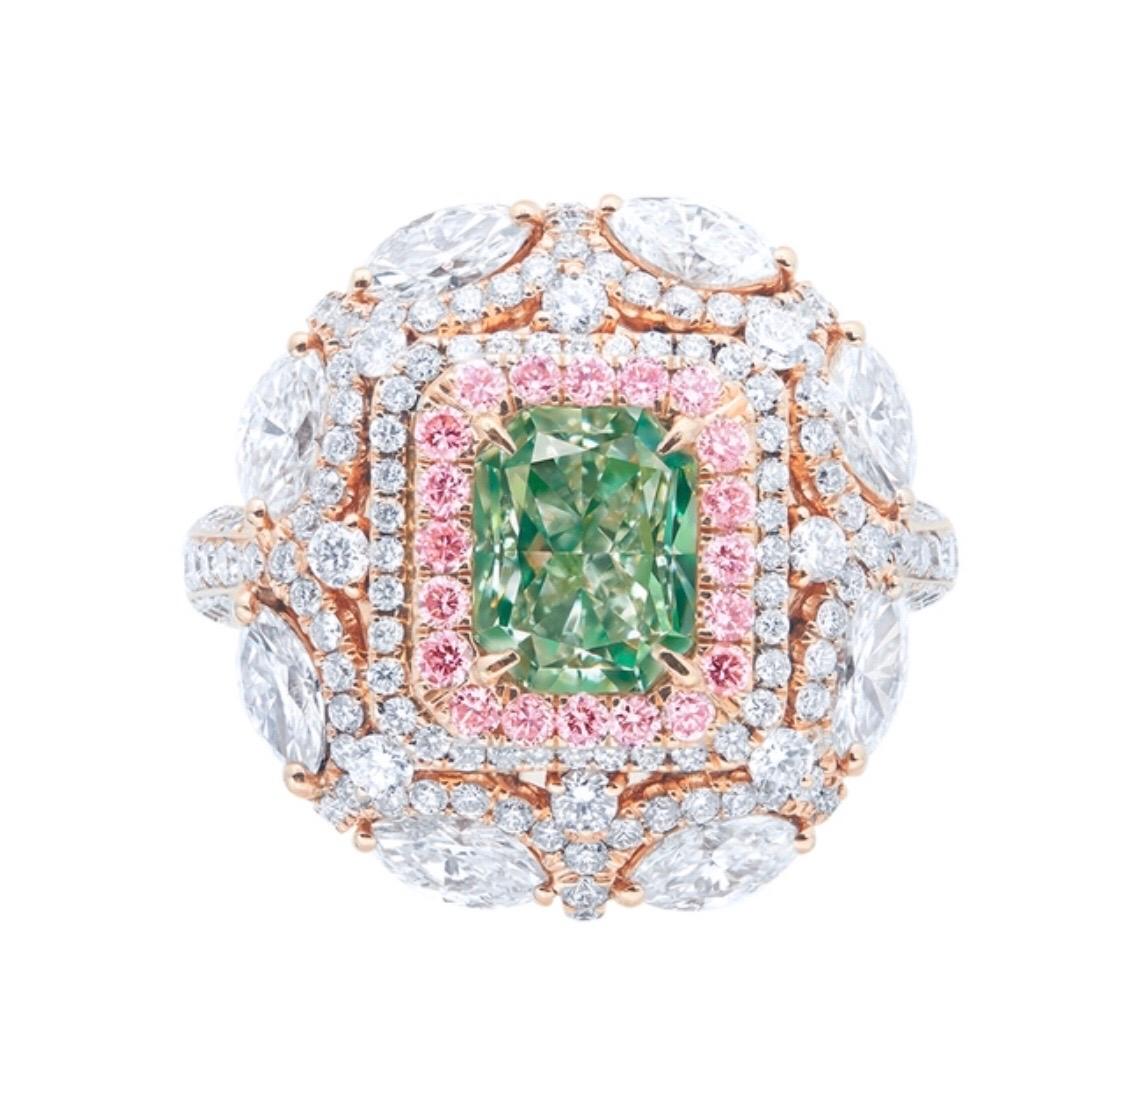 Showcasing a very special certified 1.50 carat natural fancy straight green diamond ring certified by GIA. Hand made in the Emilio Jewelry Atelier, whom specializes in rare collectible pieces in the Natural ultra rare fancy colored Diamond